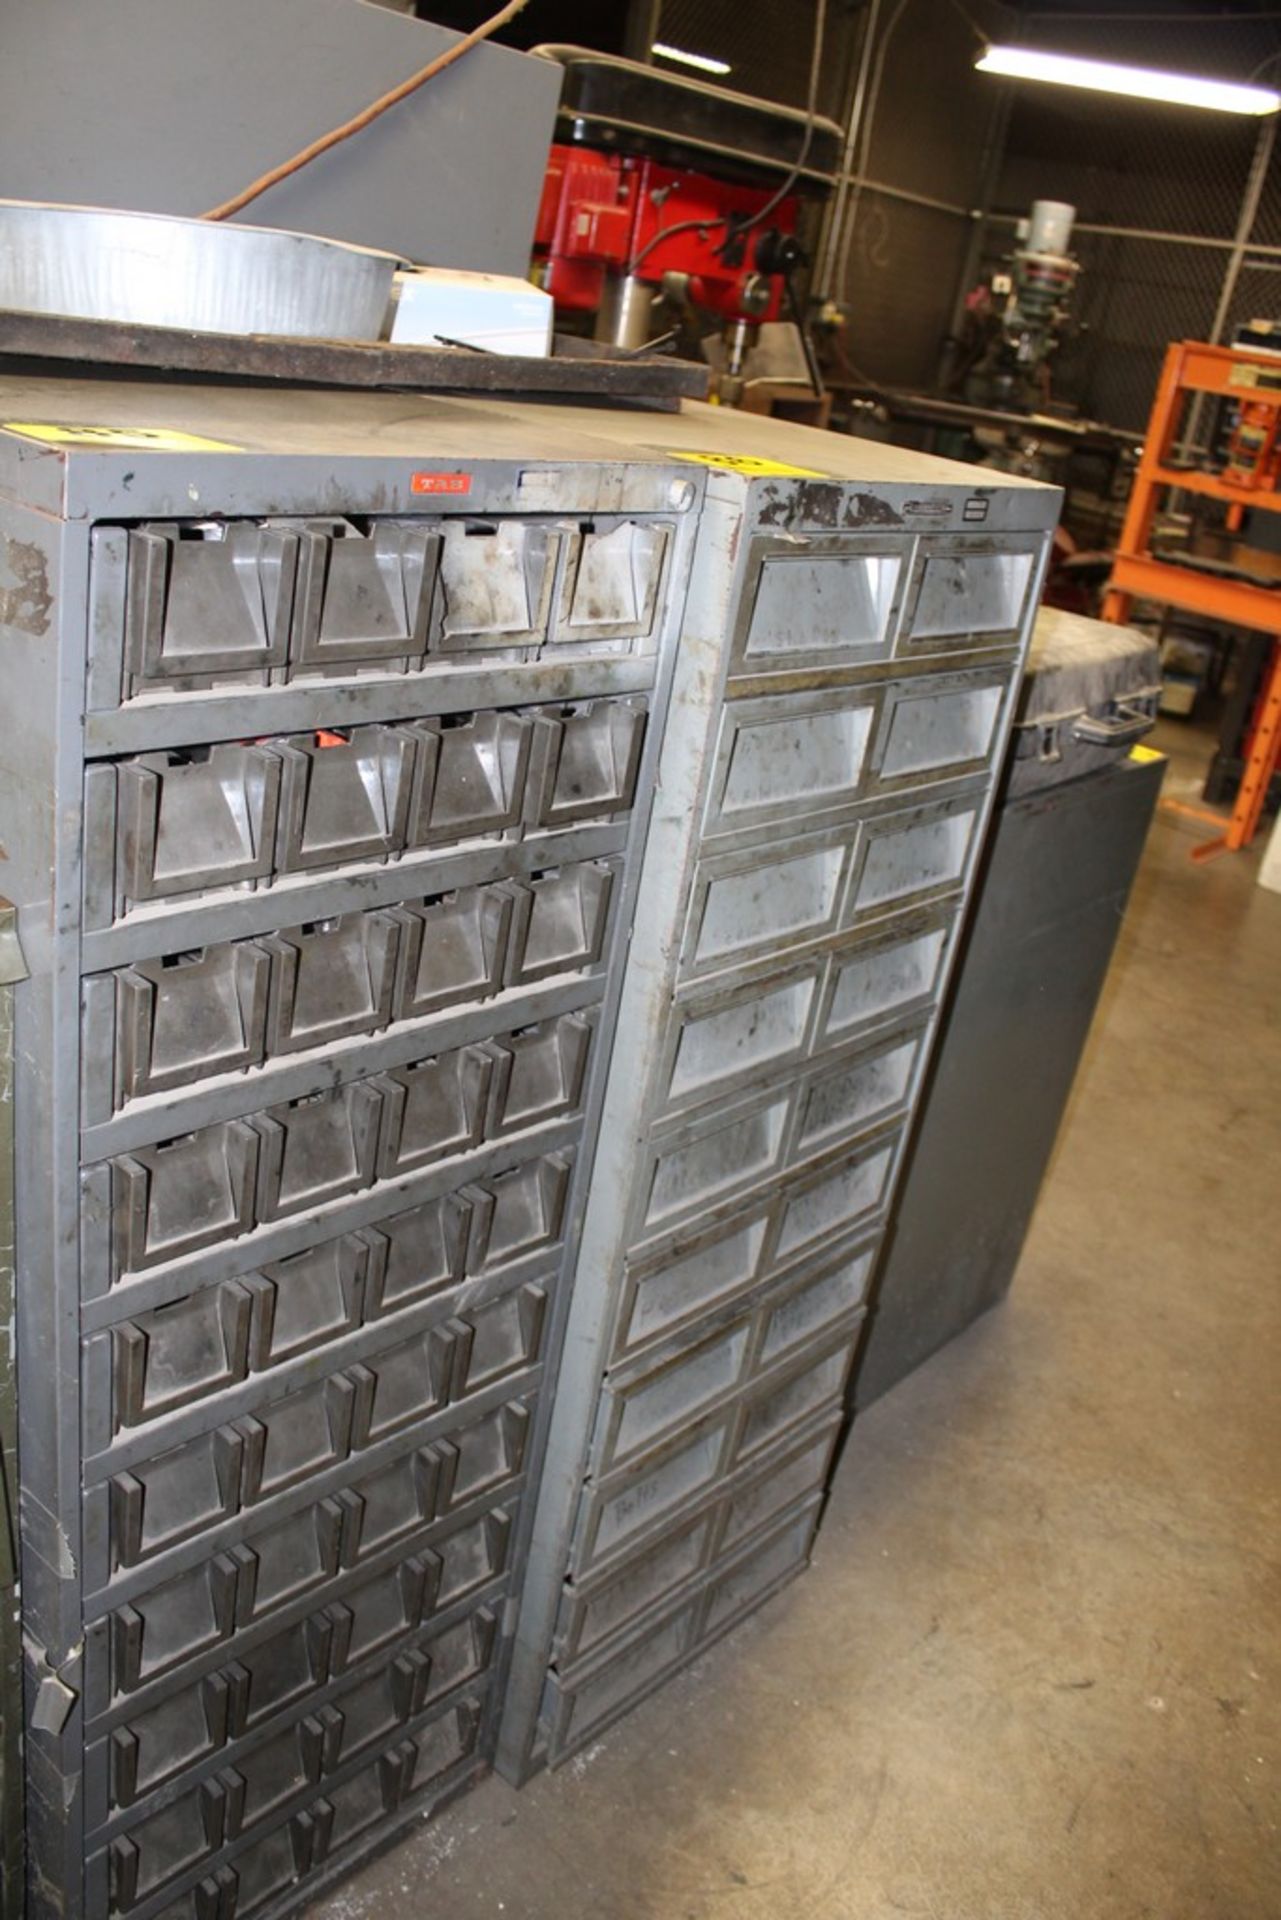 TEN DRAWER CABINET WITH CONTENTS, 19" X 28" X 52"